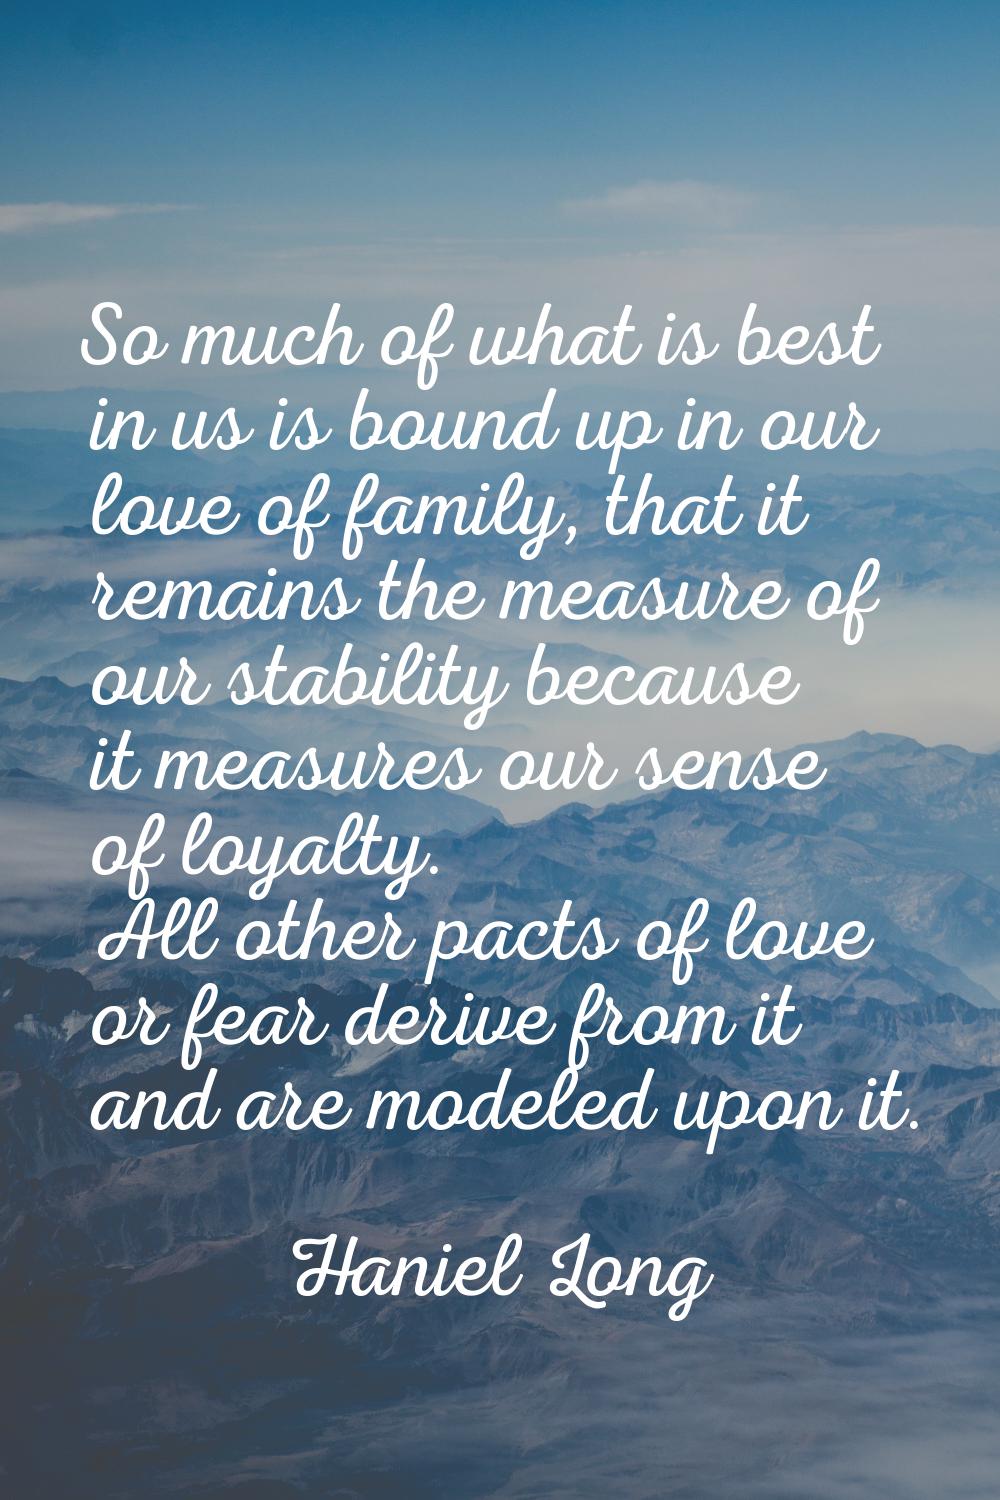 So much of what is best in us is bound up in our love of family, that it remains the measure of our